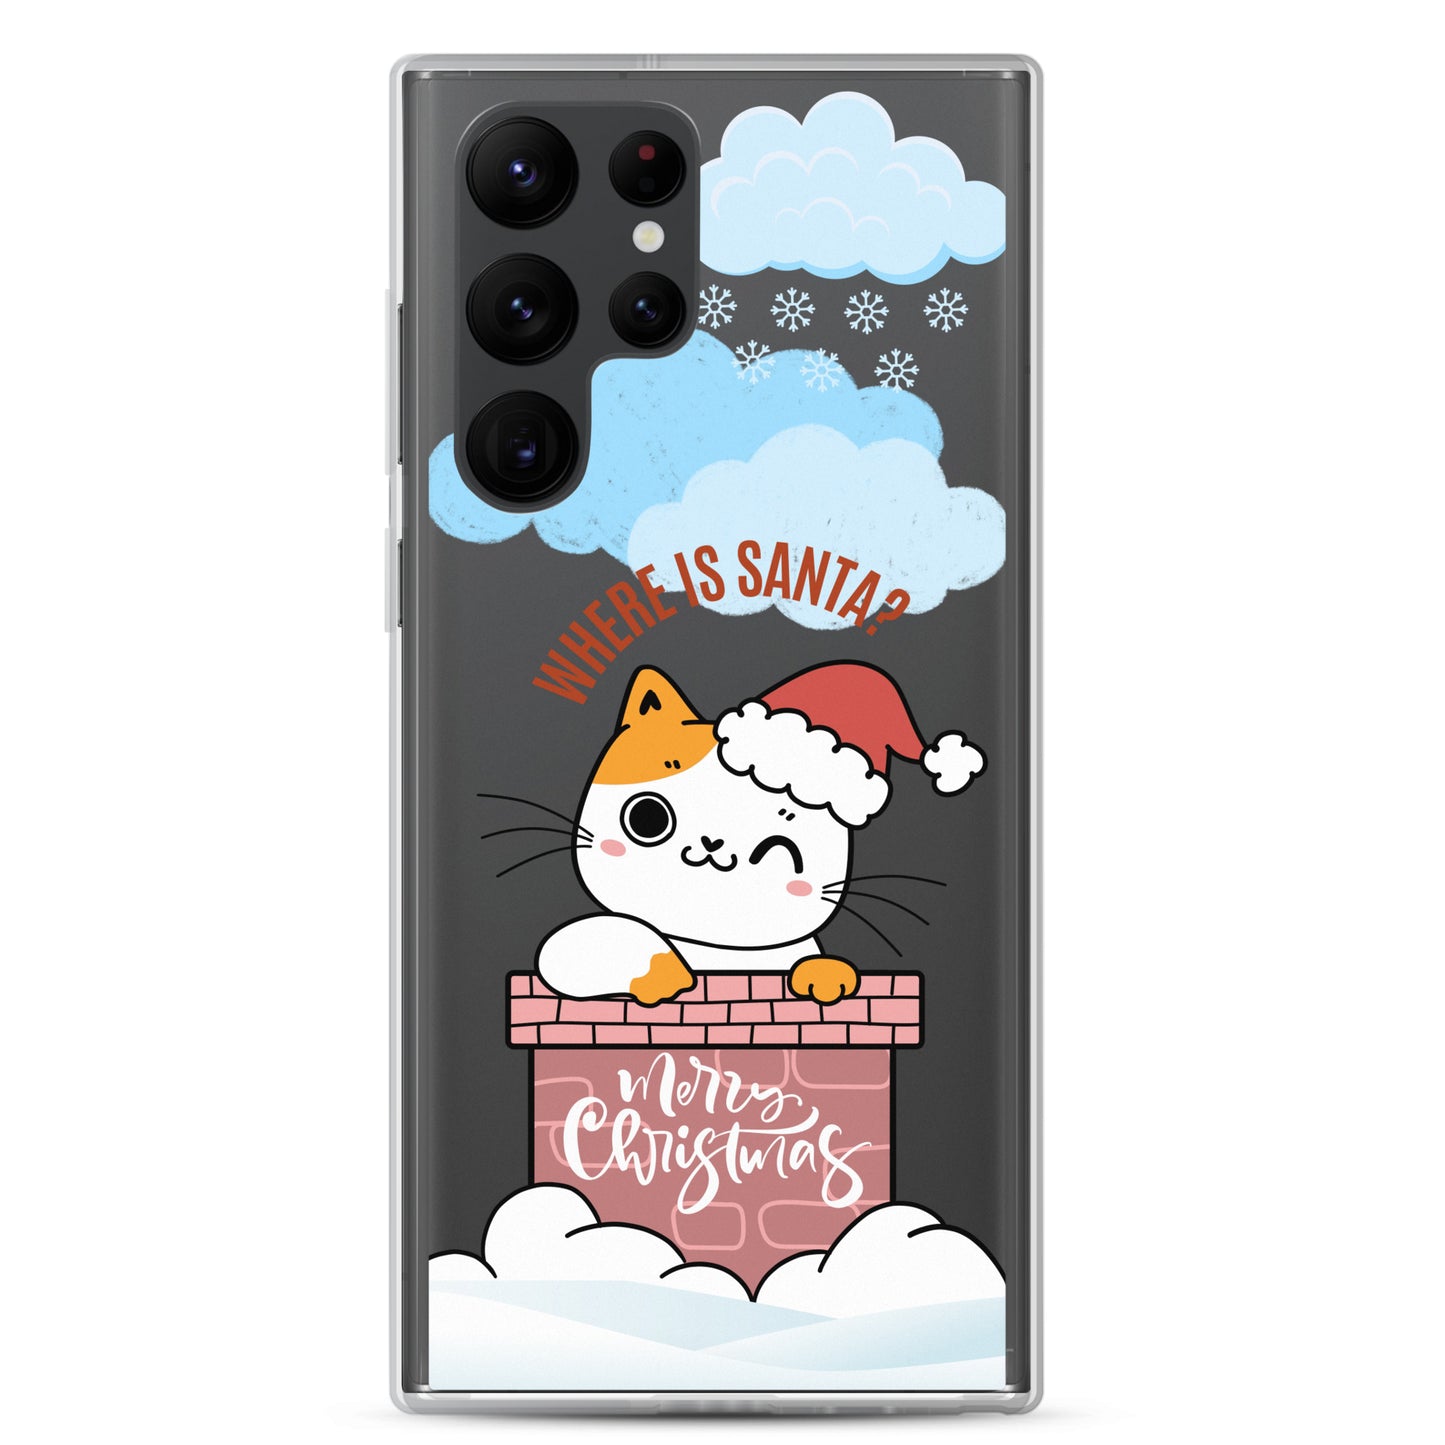 Clear Case for Samsung Galaxy S22, S22 Plus, S22 Ultra | Cat Themed